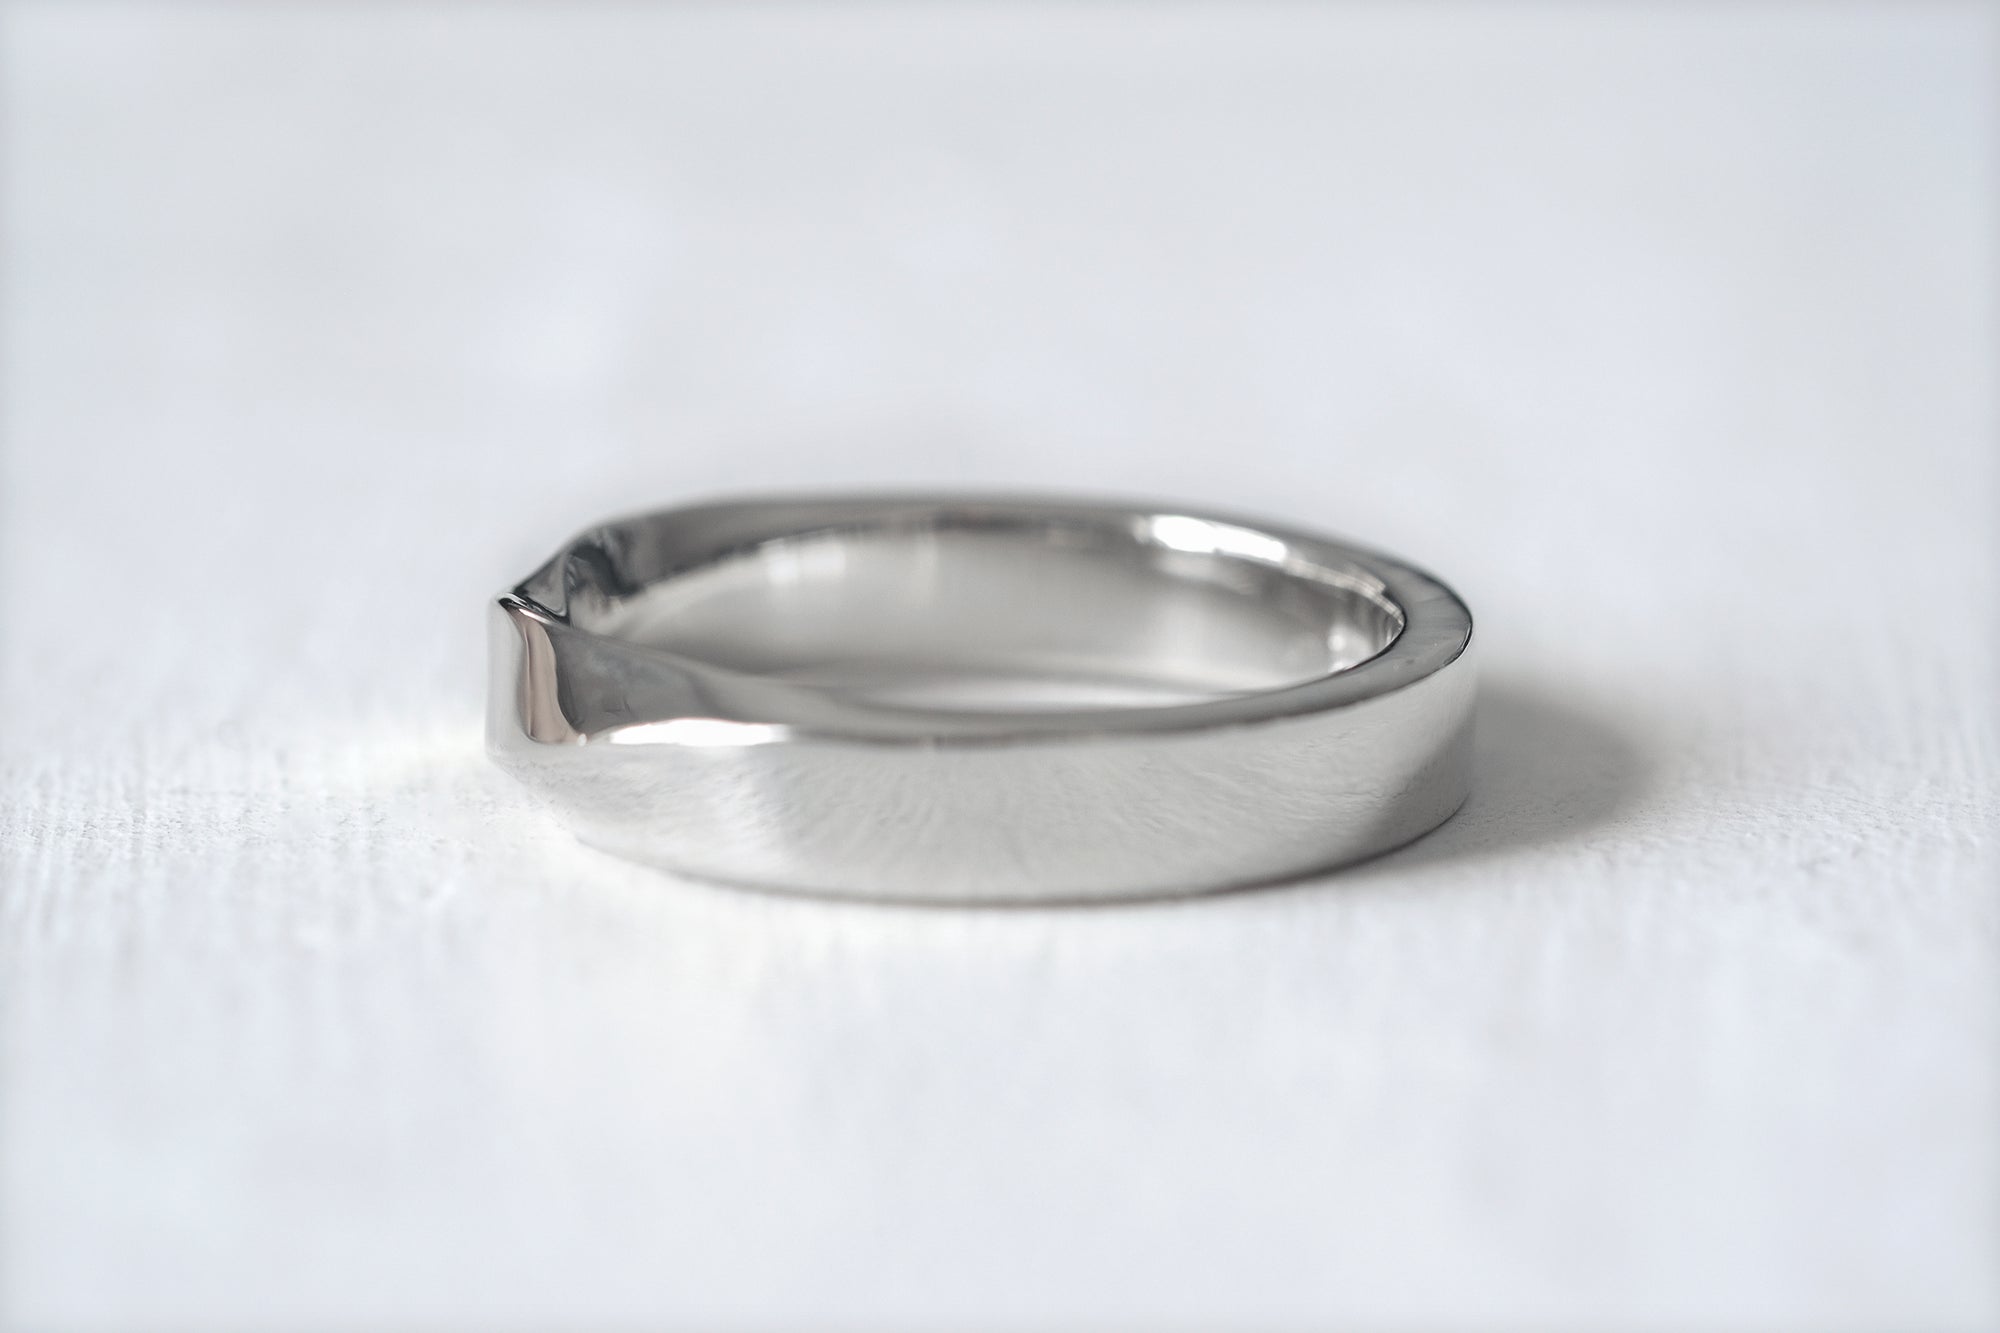 Mobius Gold Wedding Ring 4mm With A Shiny Finish